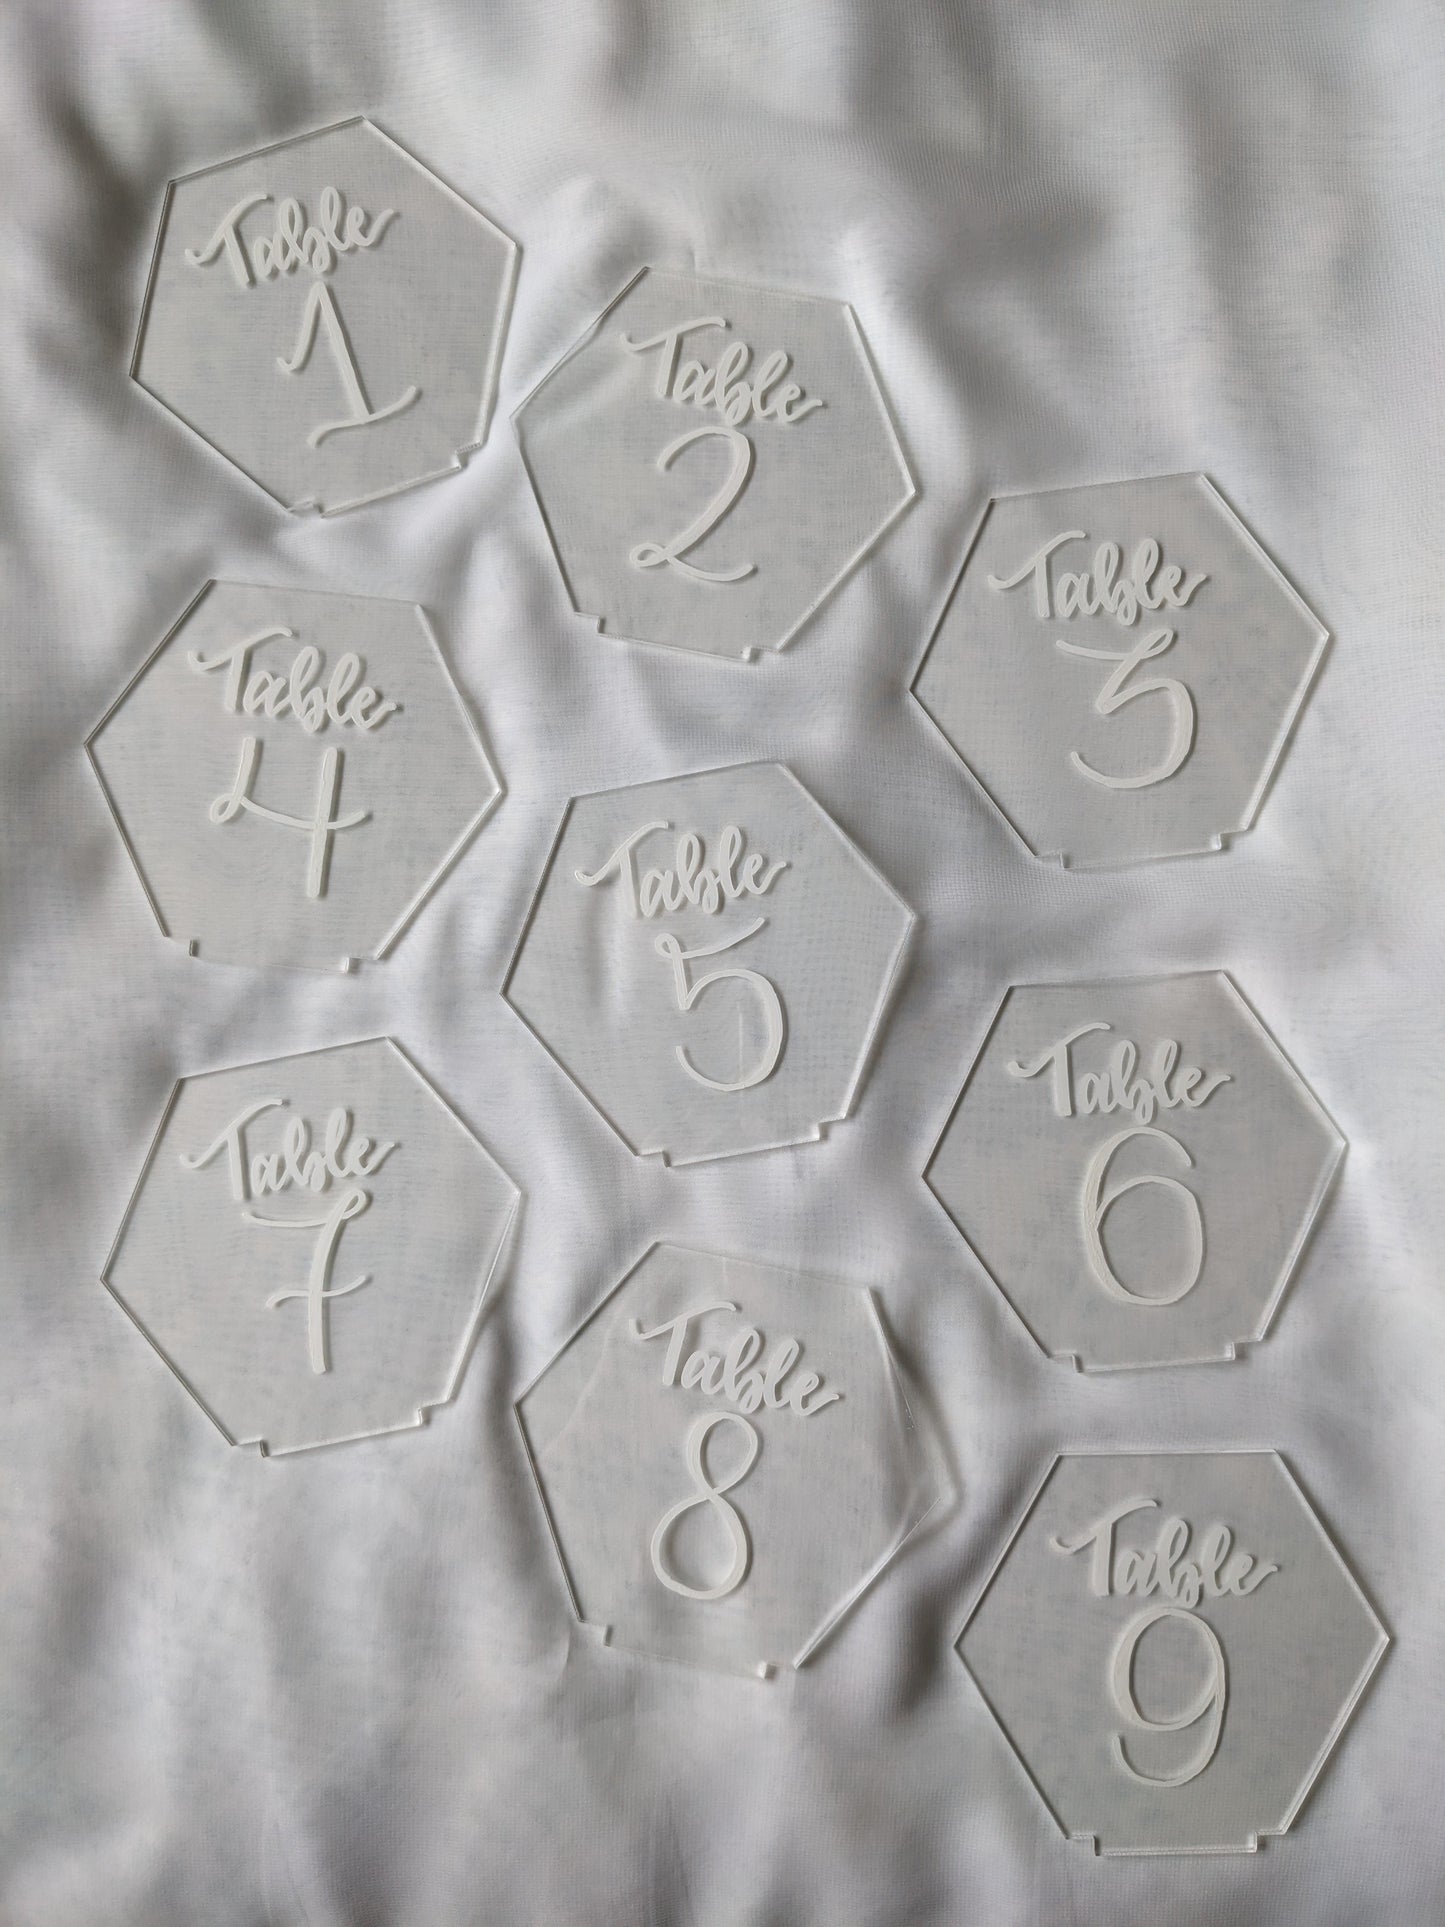 Acrylic table names/numbers